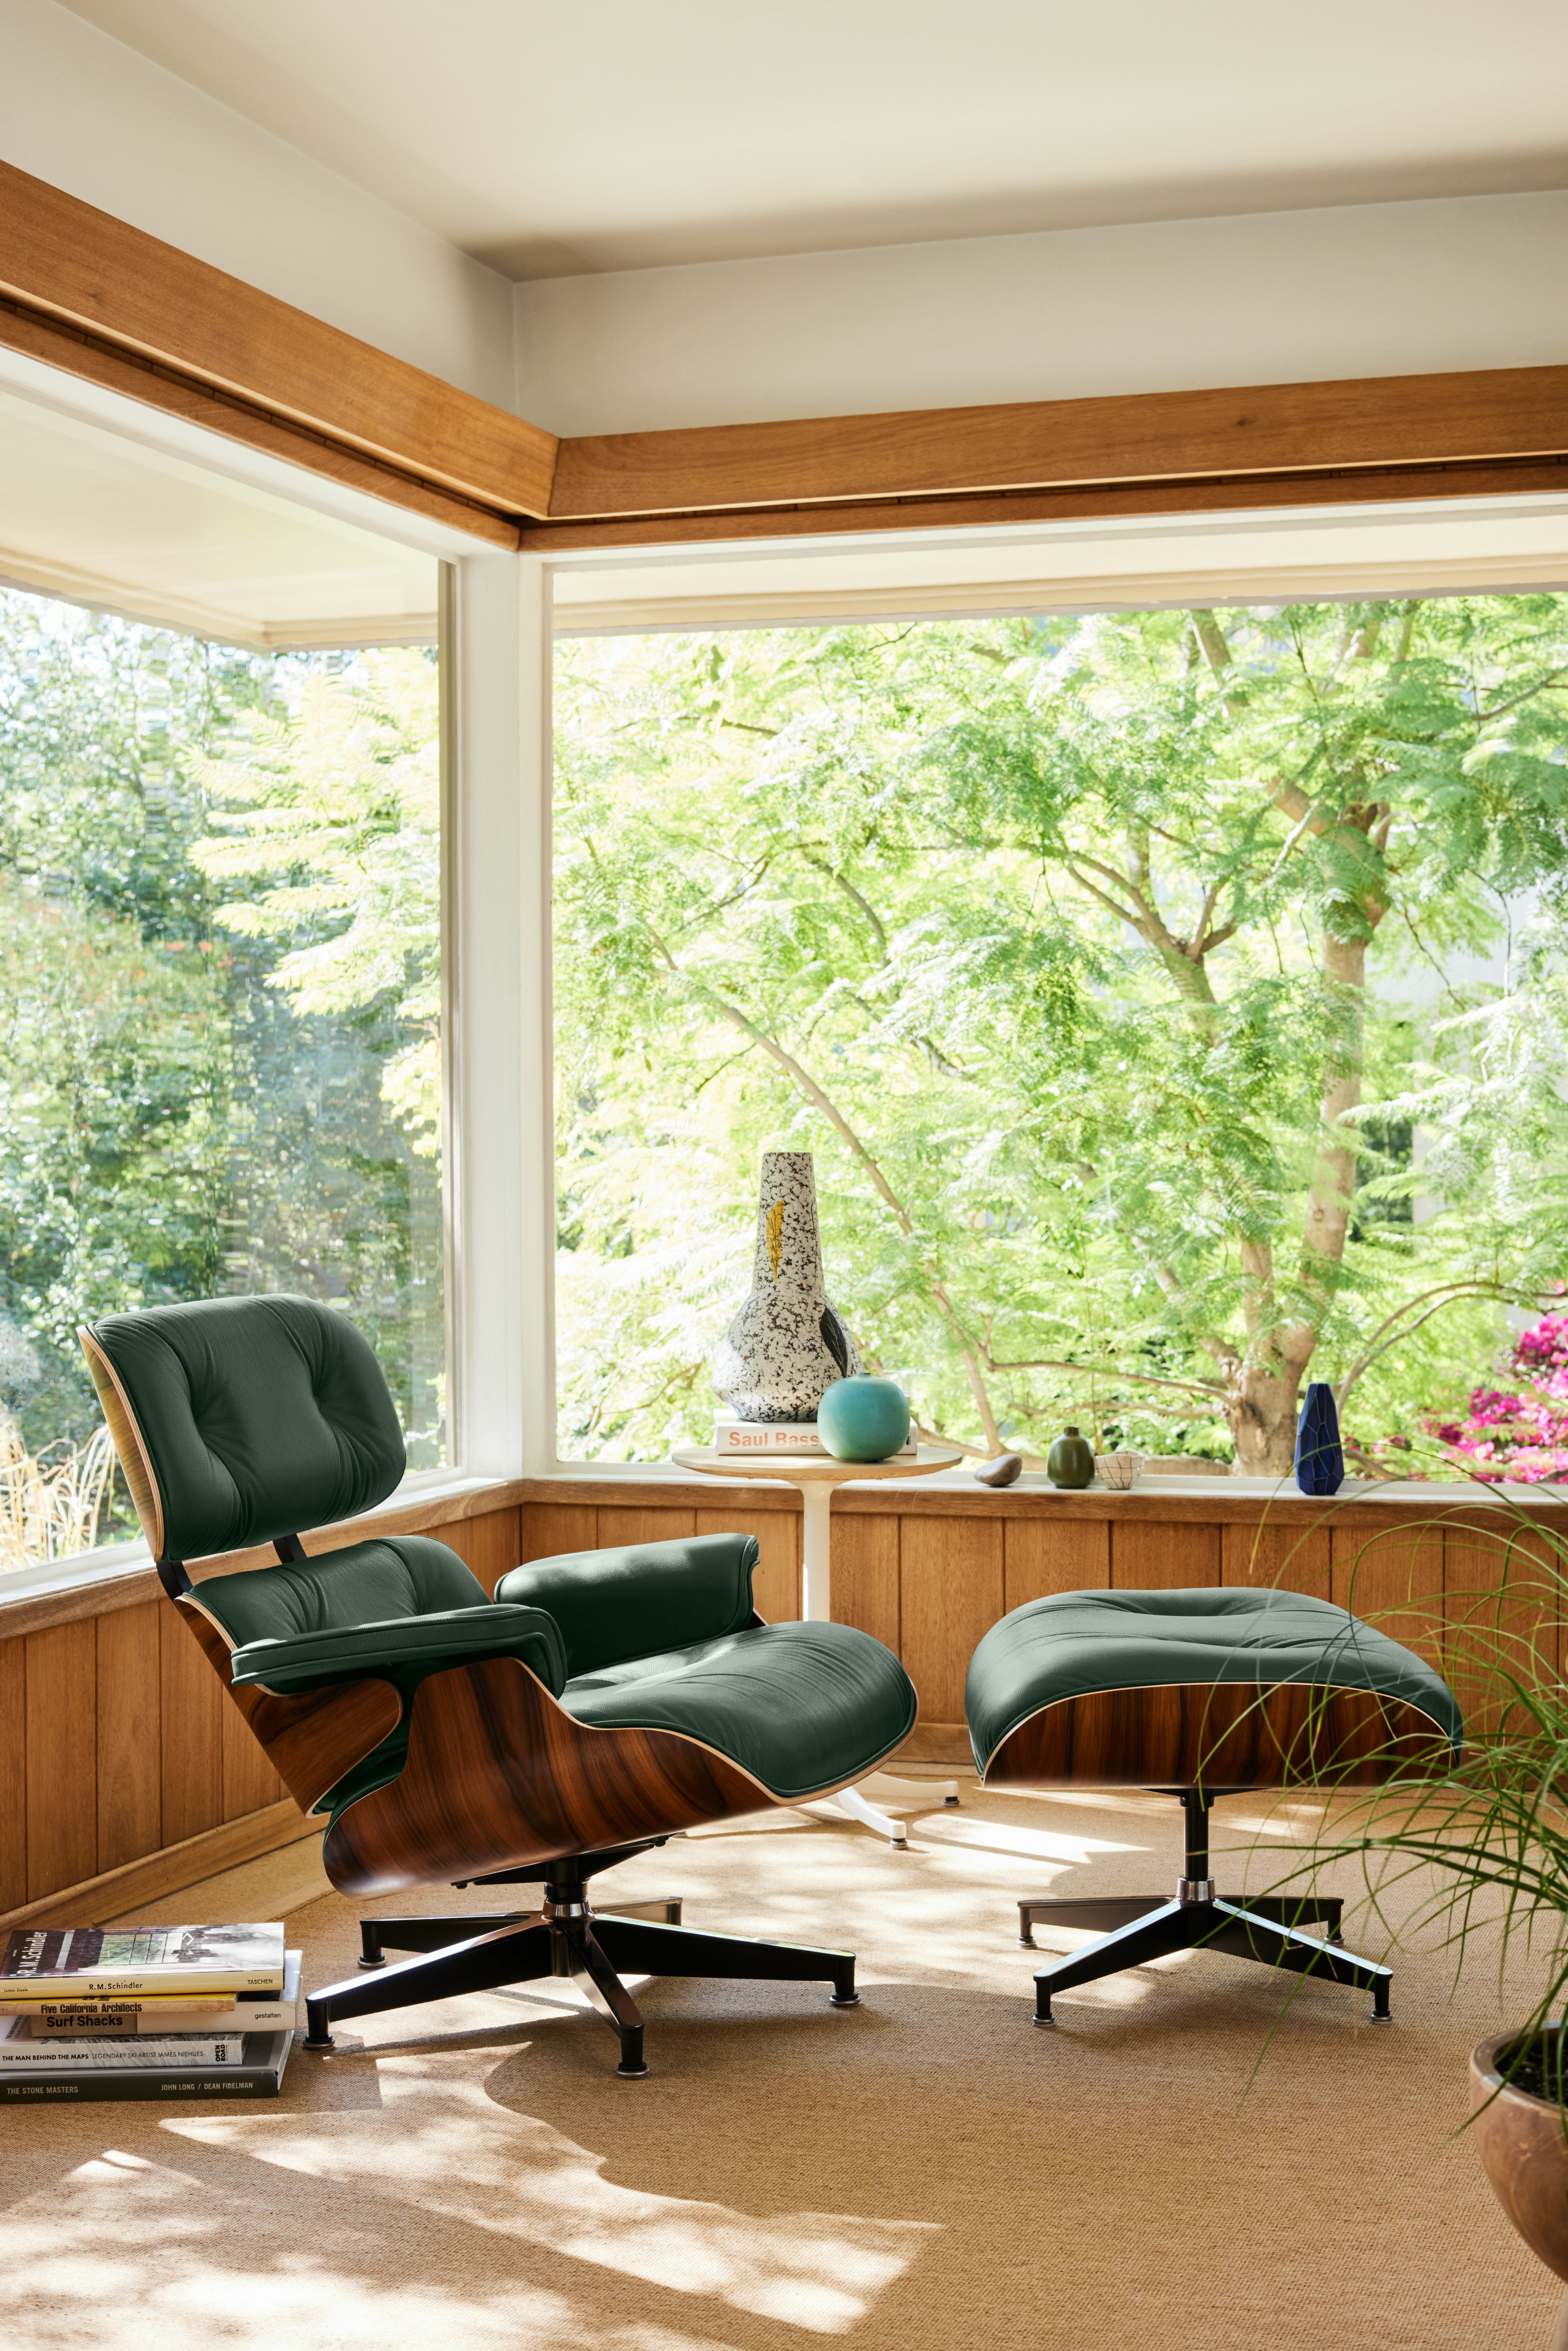 Ottoman　–　Eames　Miller　Lounge　Chair　Herman　and　Store